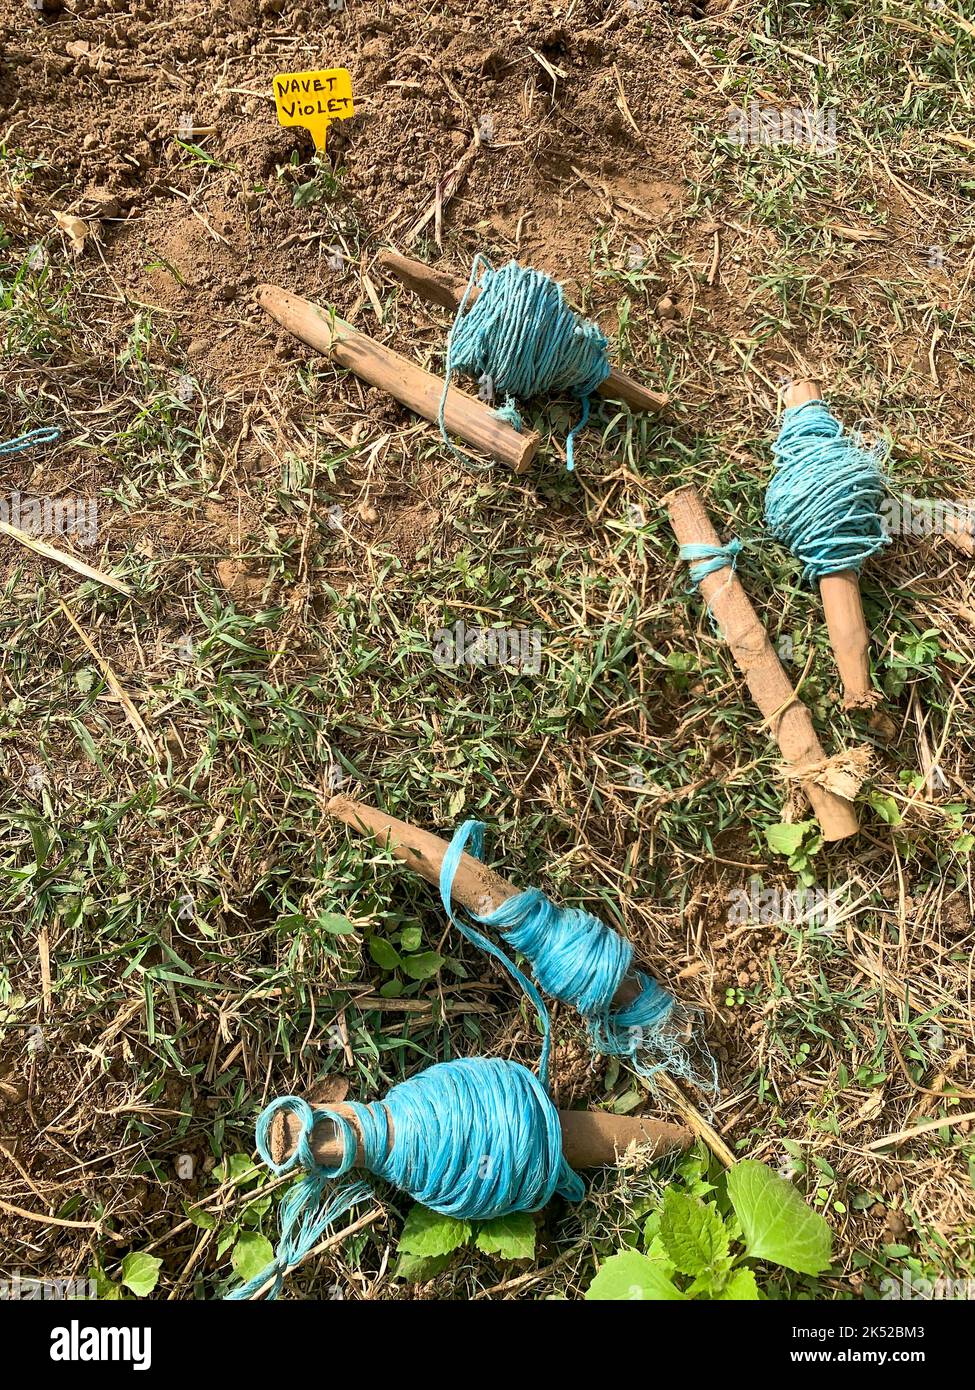 Vegetable cultivation, sowing tools, Saint-Priest, Rhone, AURA Region, France Stock Photo